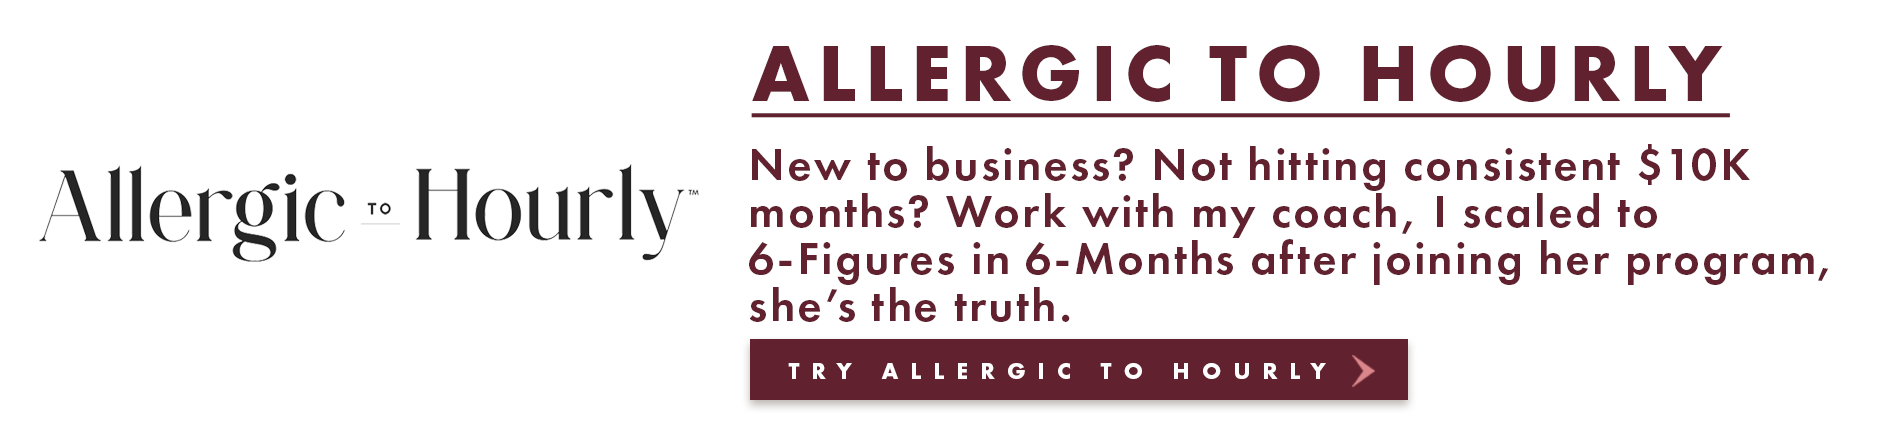 Try Allergic to Hourly